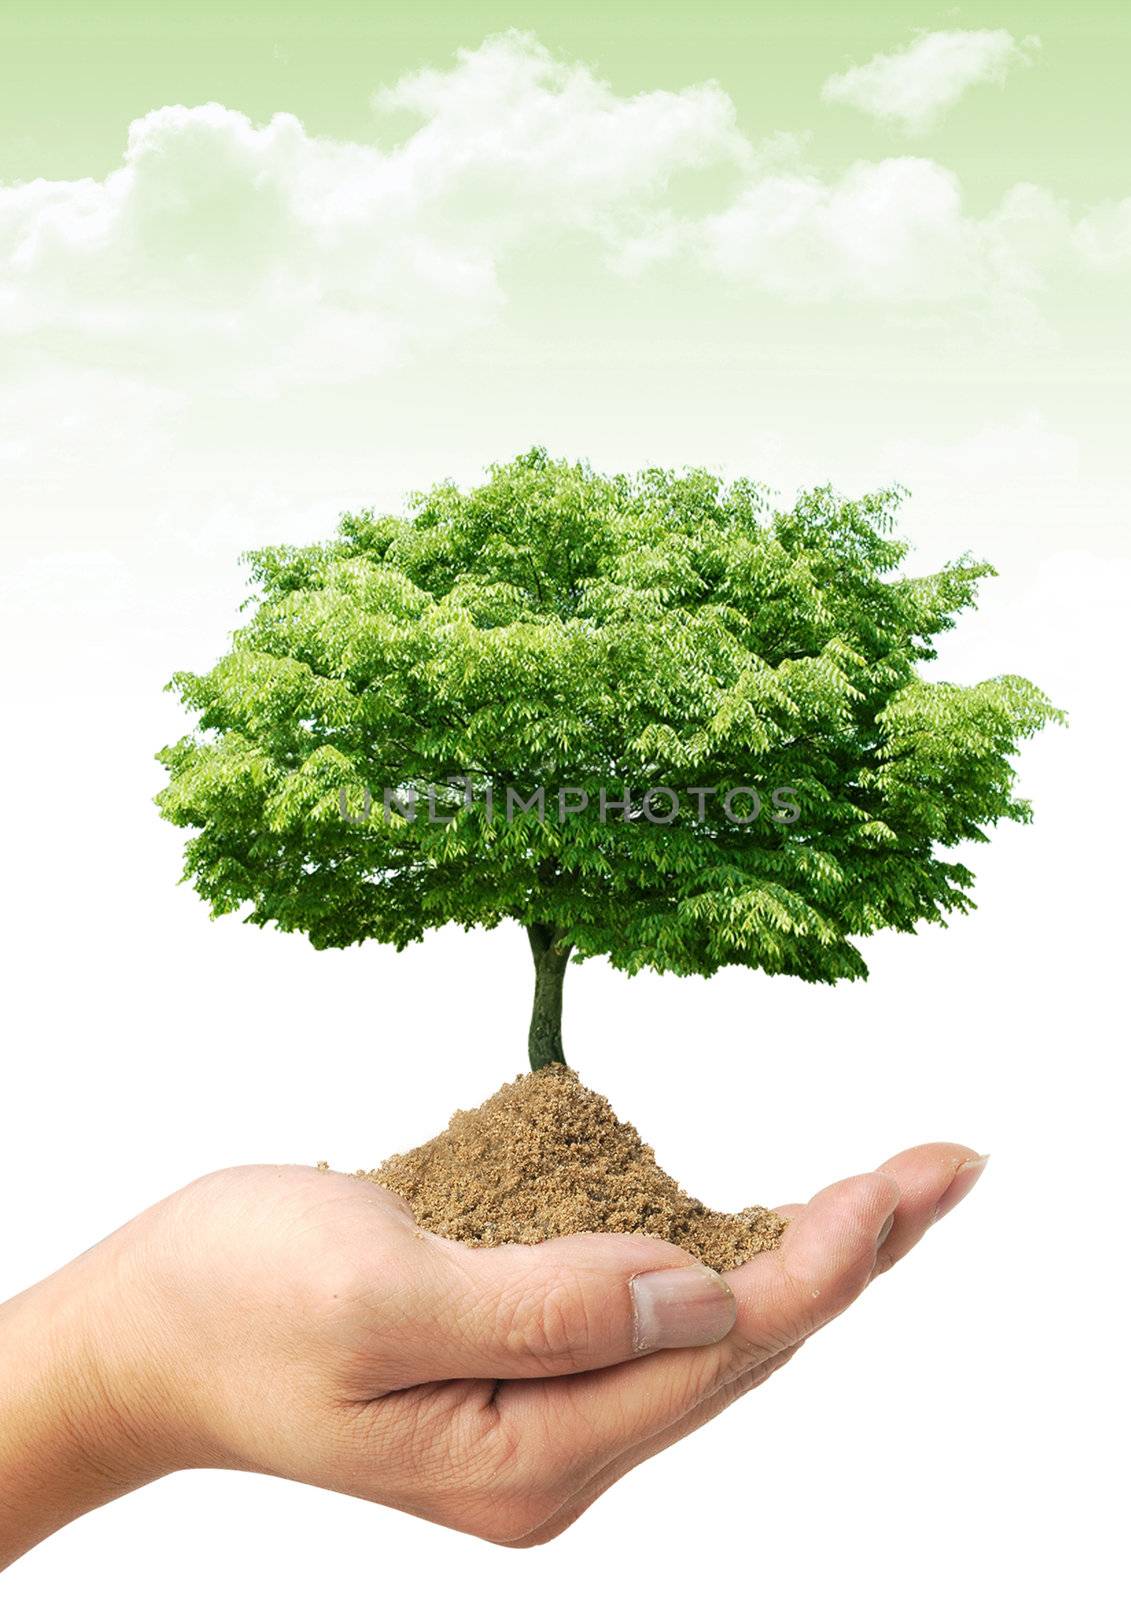 Nice spring picture with green tree on the hand